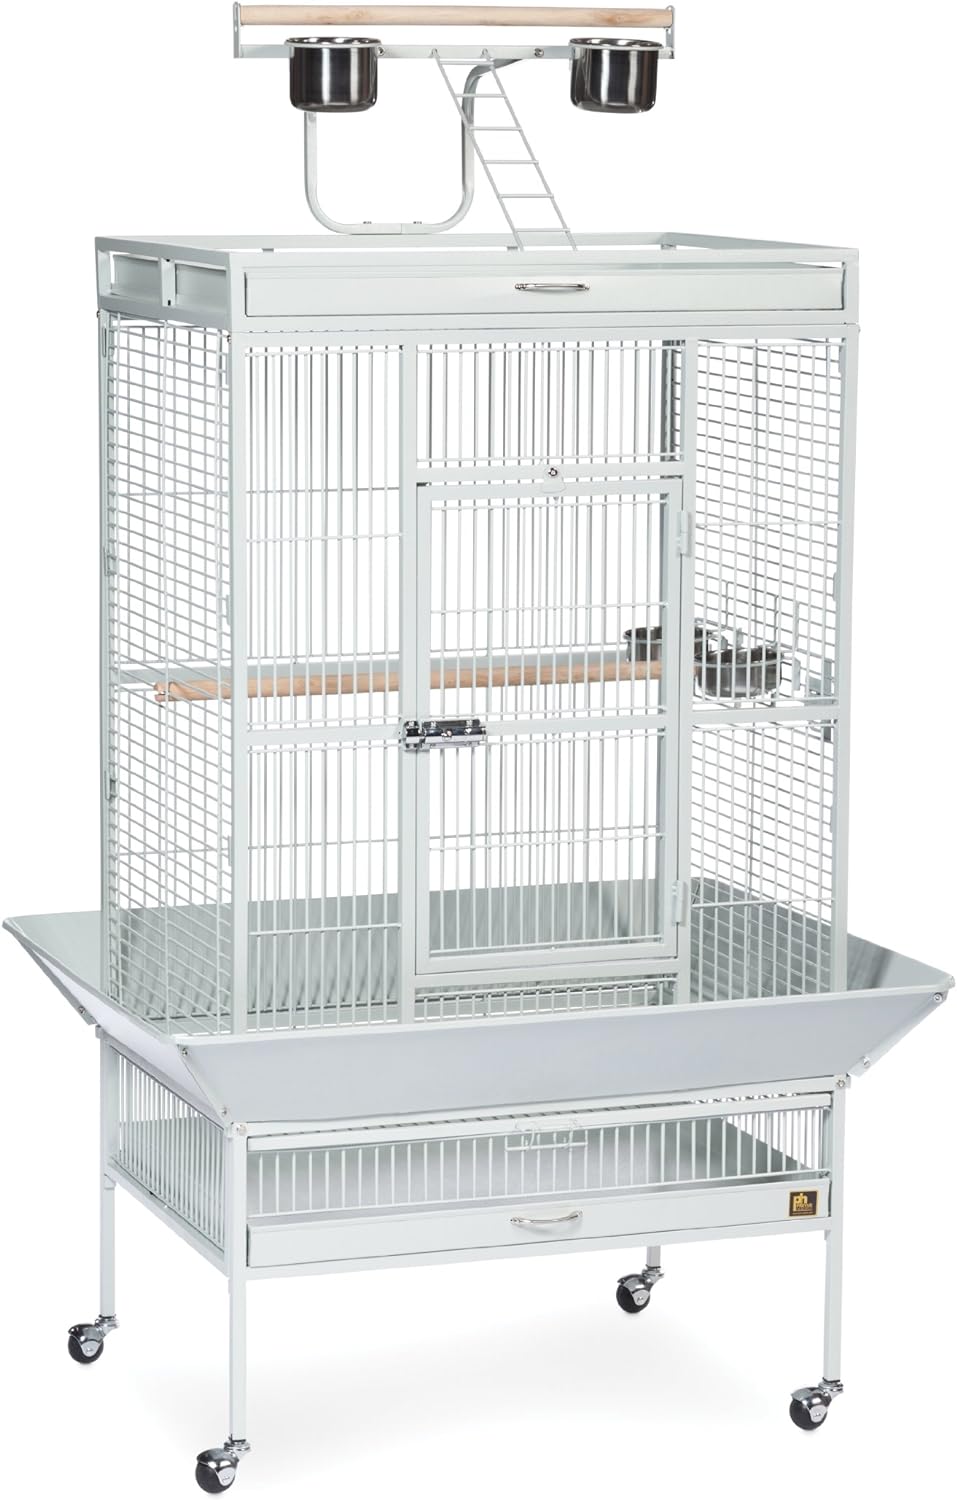 Prevue Pet Products Wrought Iron Select Bird Cage White